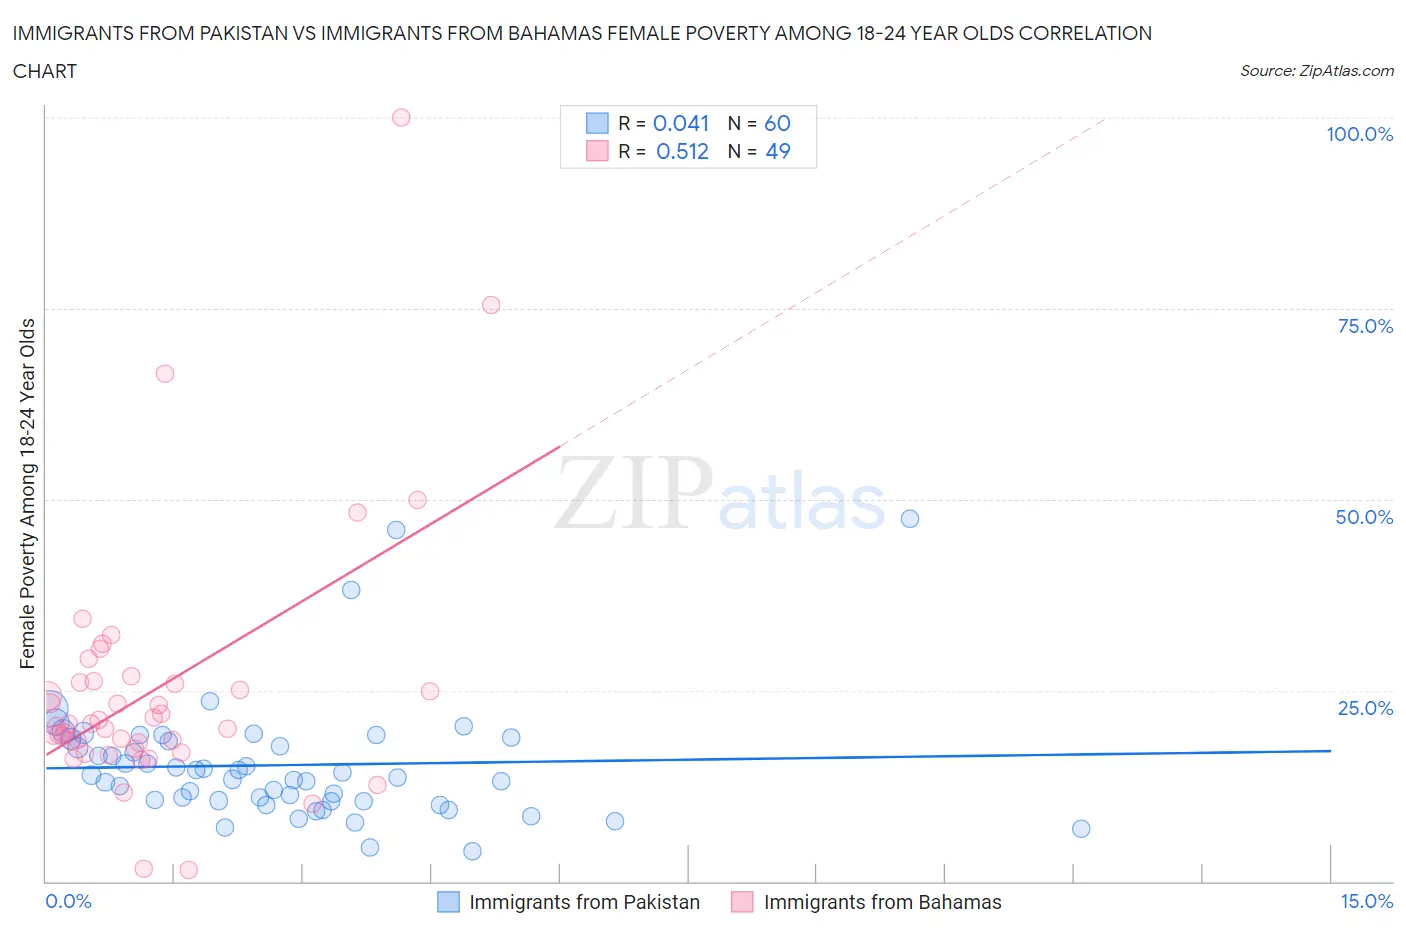 Immigrants from Pakistan vs Immigrants from Bahamas Female Poverty Among 18-24 Year Olds